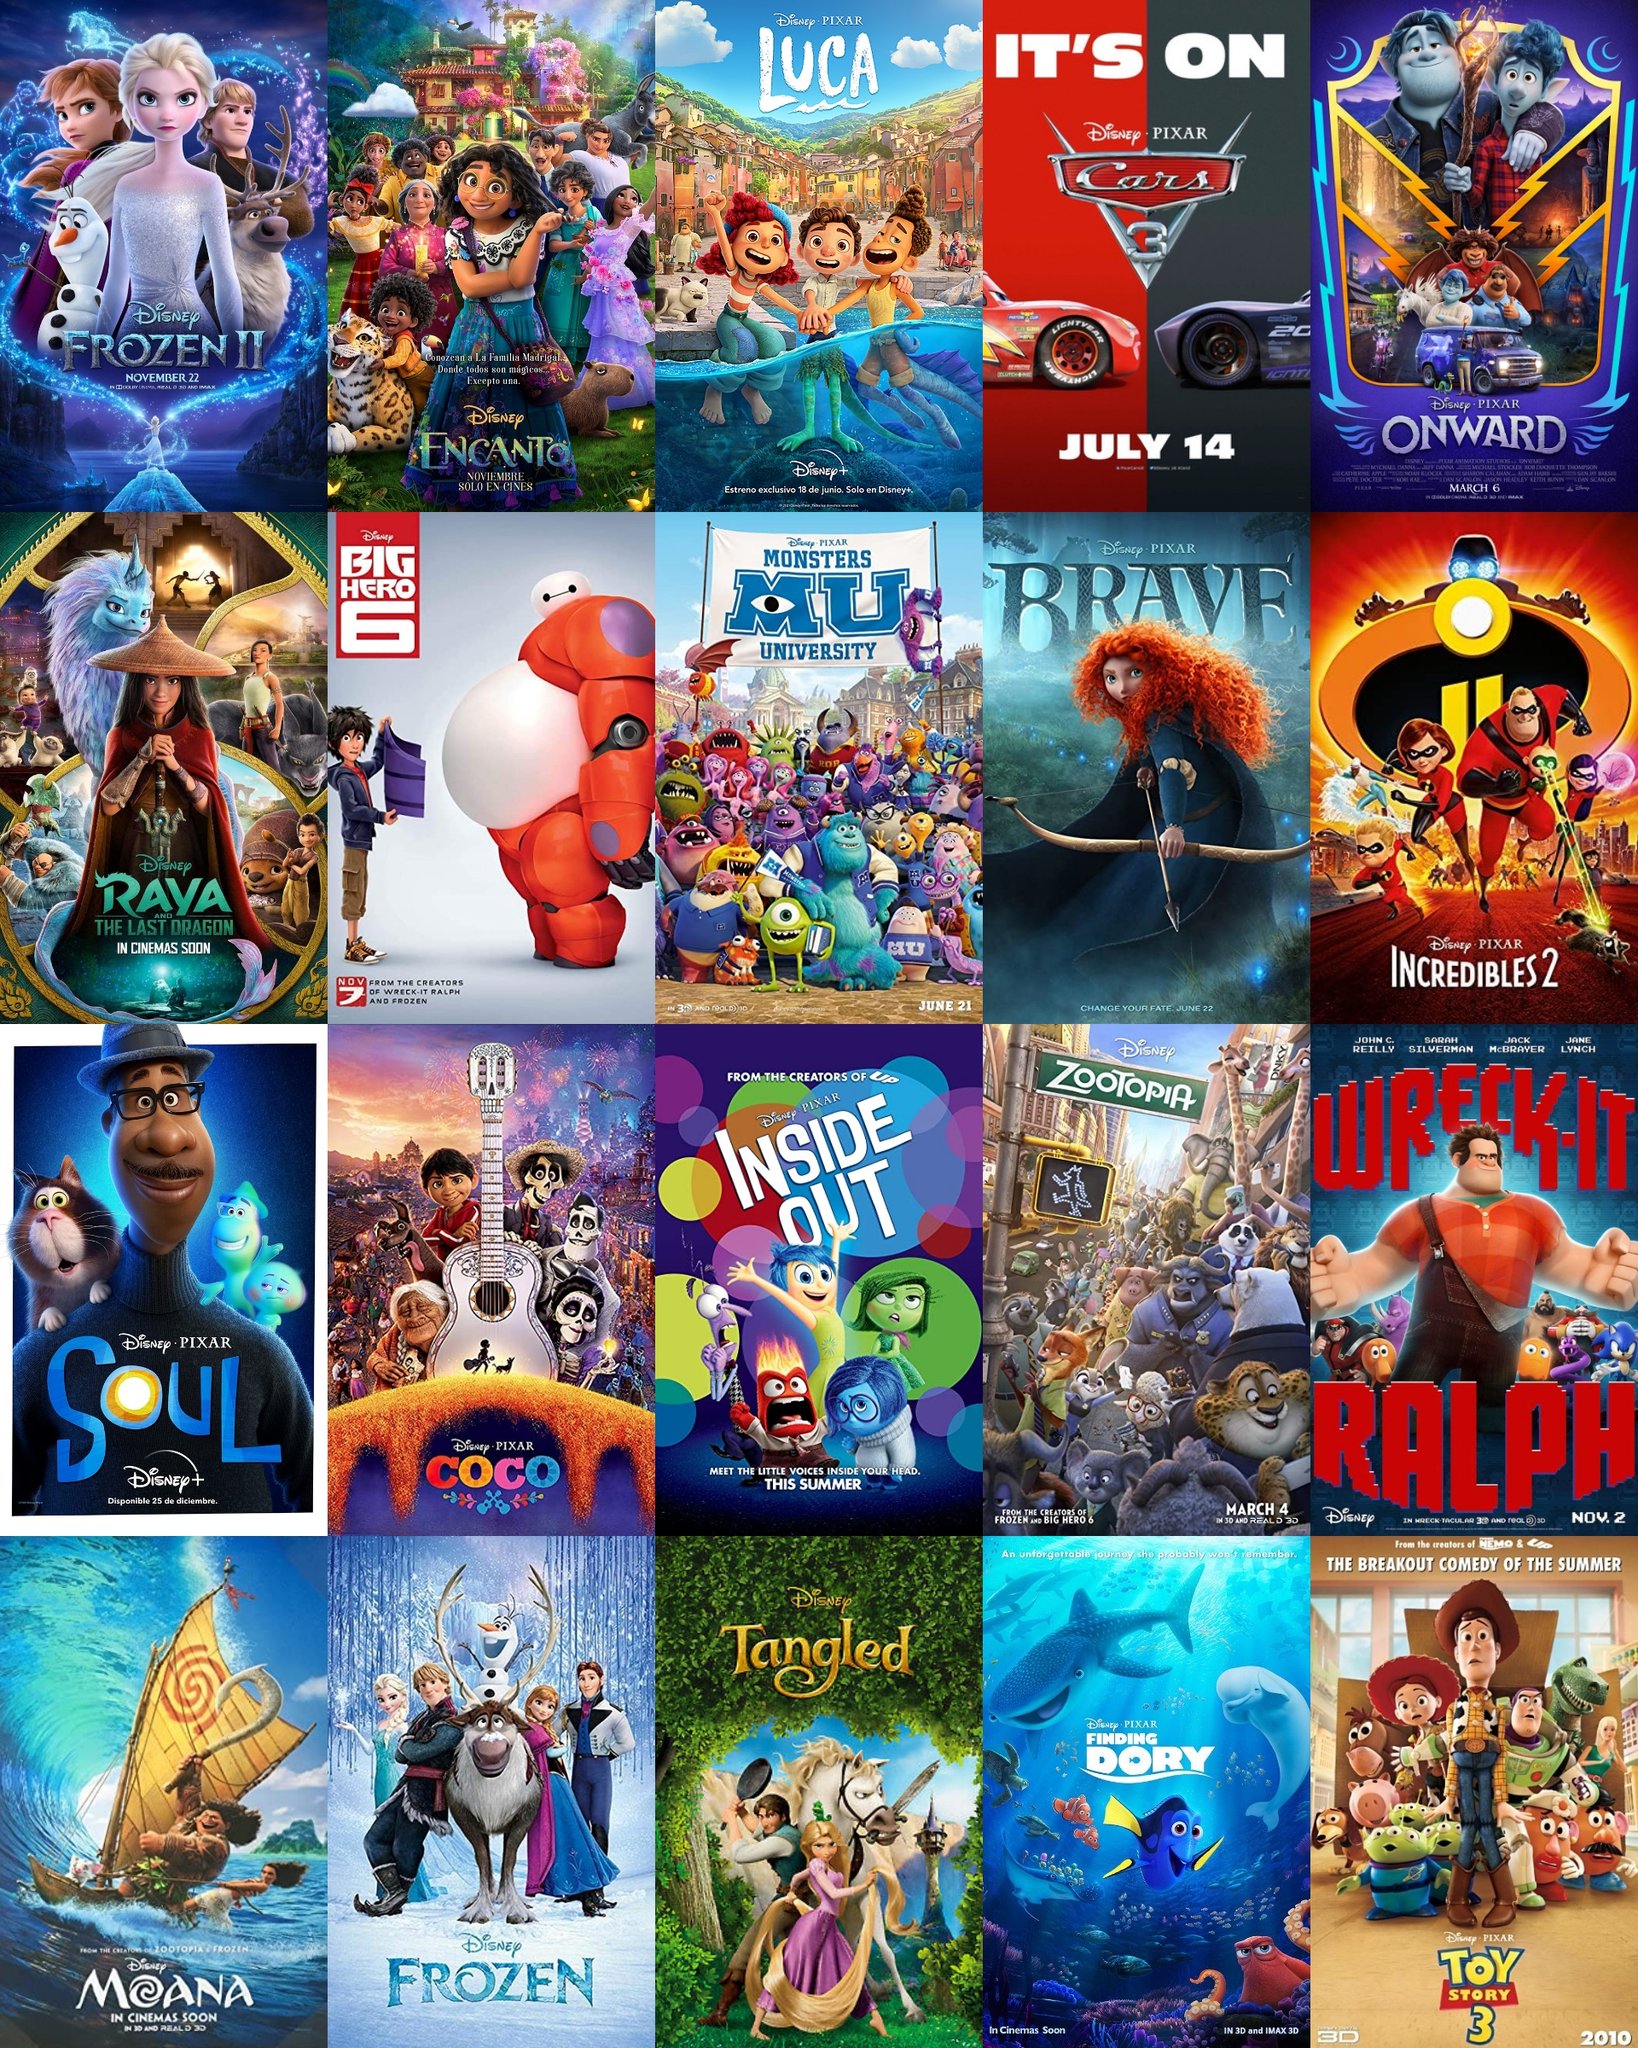 Auto veinte Posicionamiento en buscadores Disney Animation Promos on Twitter: "You can only save 5 of these Disney/ Pixar  films, which are you choosing? 👀 https://t.co/eZoZoSjkXl" / Twitter